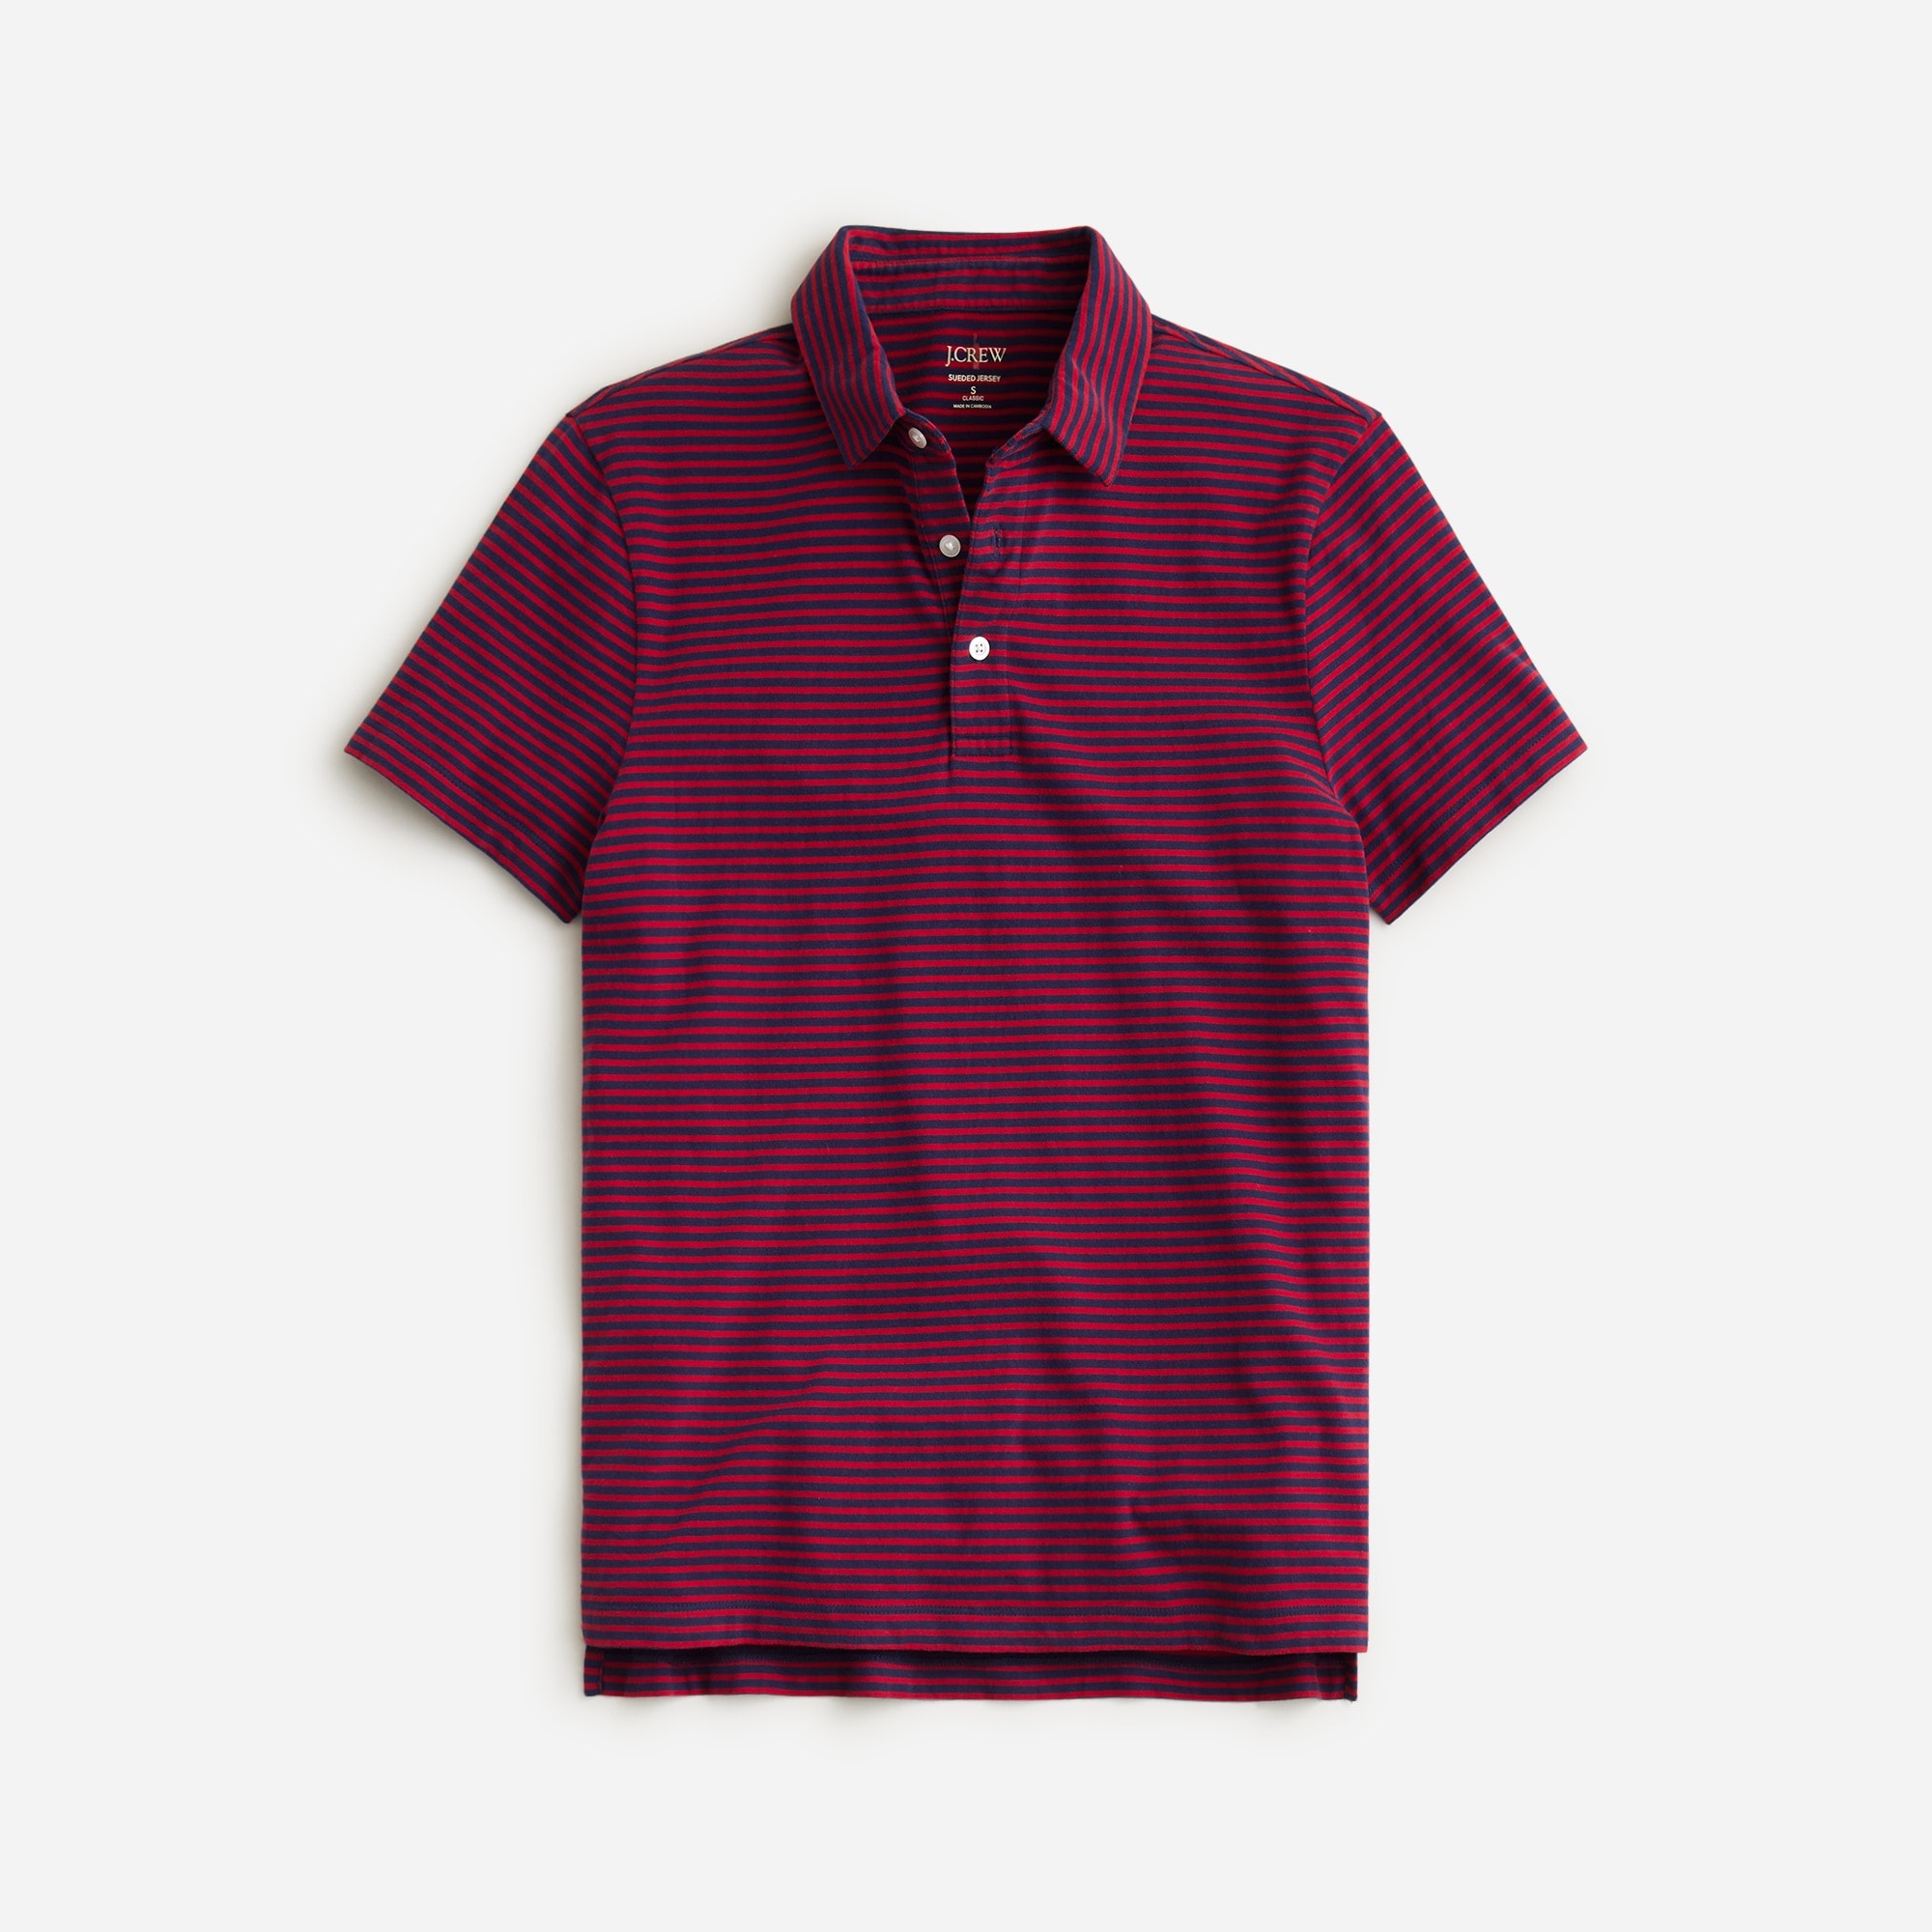  Sueded cotton polo shirt in stripe